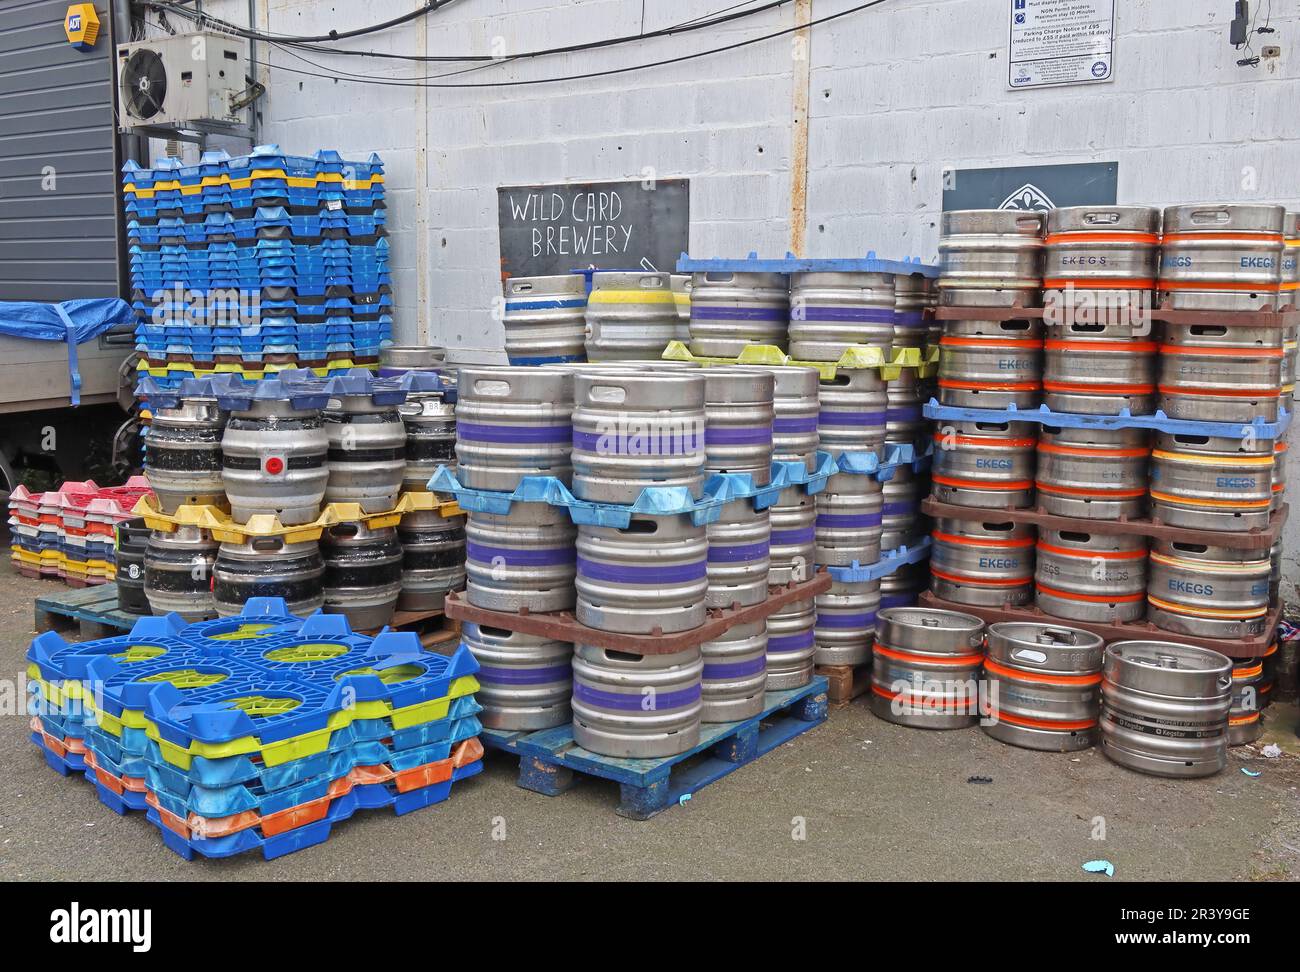 Craft Keg Store - Wildcard Brewery Walthamstow, Shernhall St, Londres, Angleterre, Royaume-Uni, E17 9HQ Banque D'Images